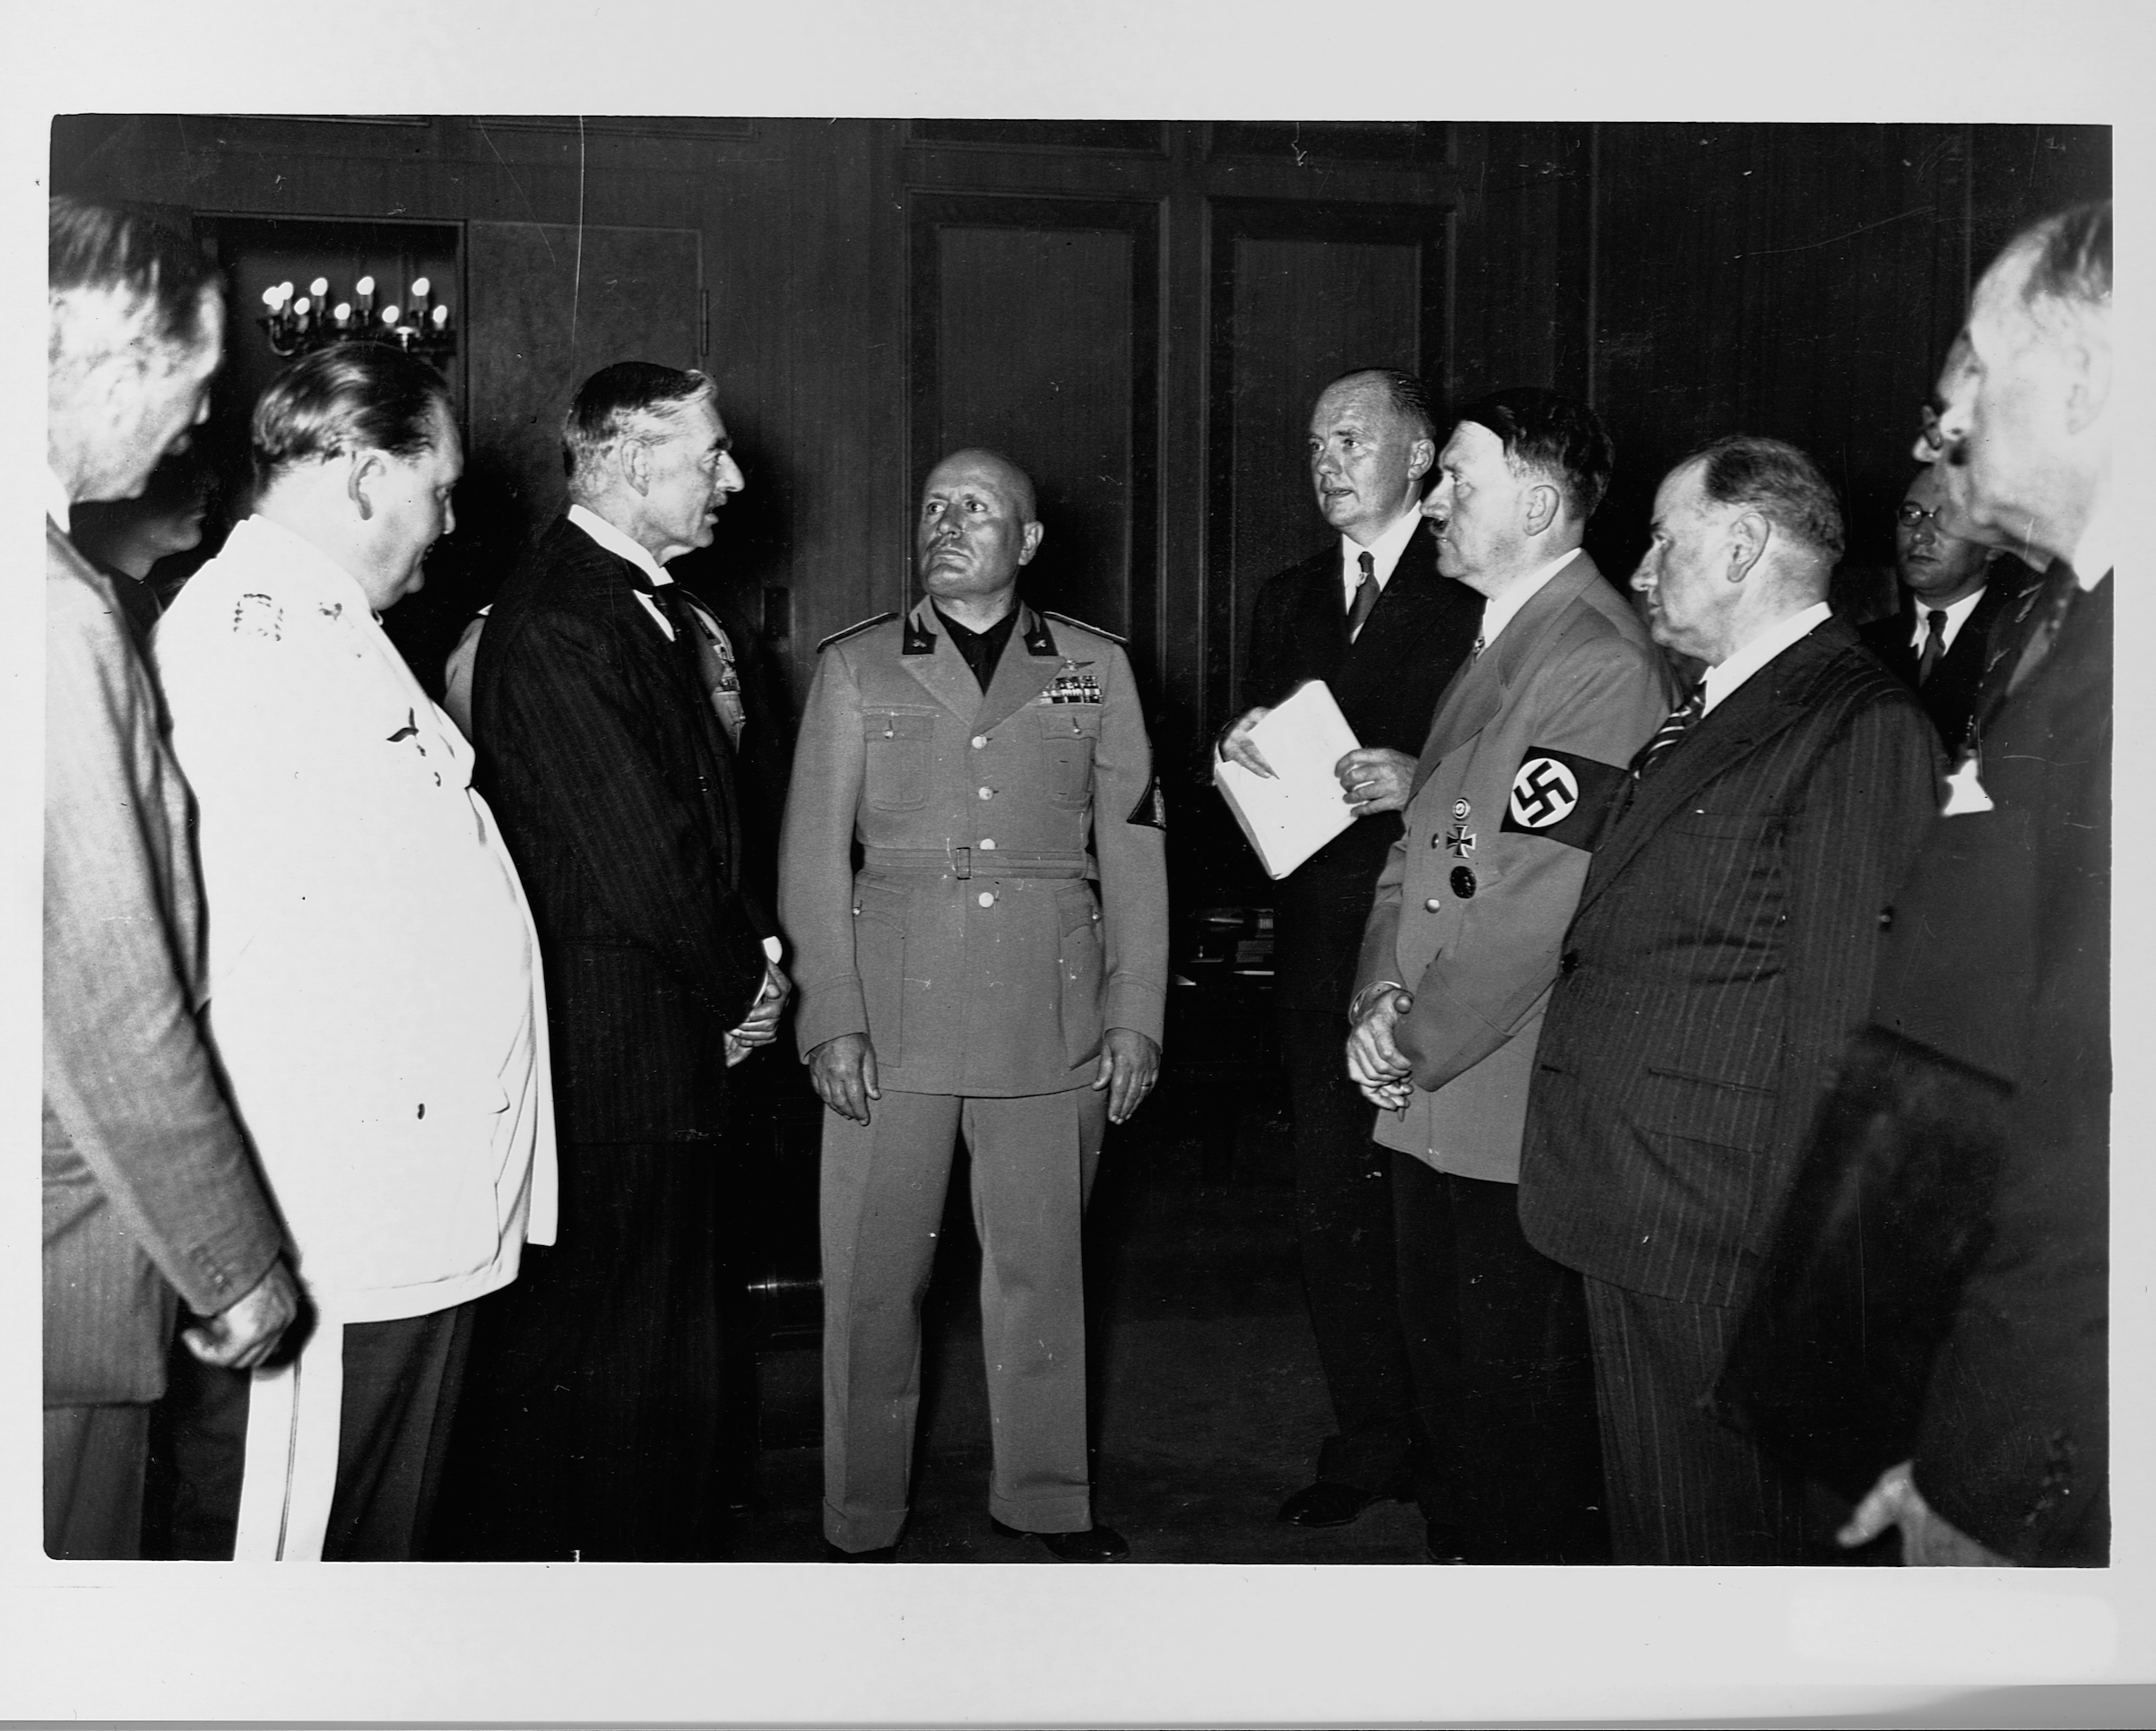 Neville Chamberlain, Adolph Hitler, Benito Mussolini, and Hermann Goering stand together at the Munich Conference in 1938. (Library of Congress—Corbis/VCG via Getty Images)